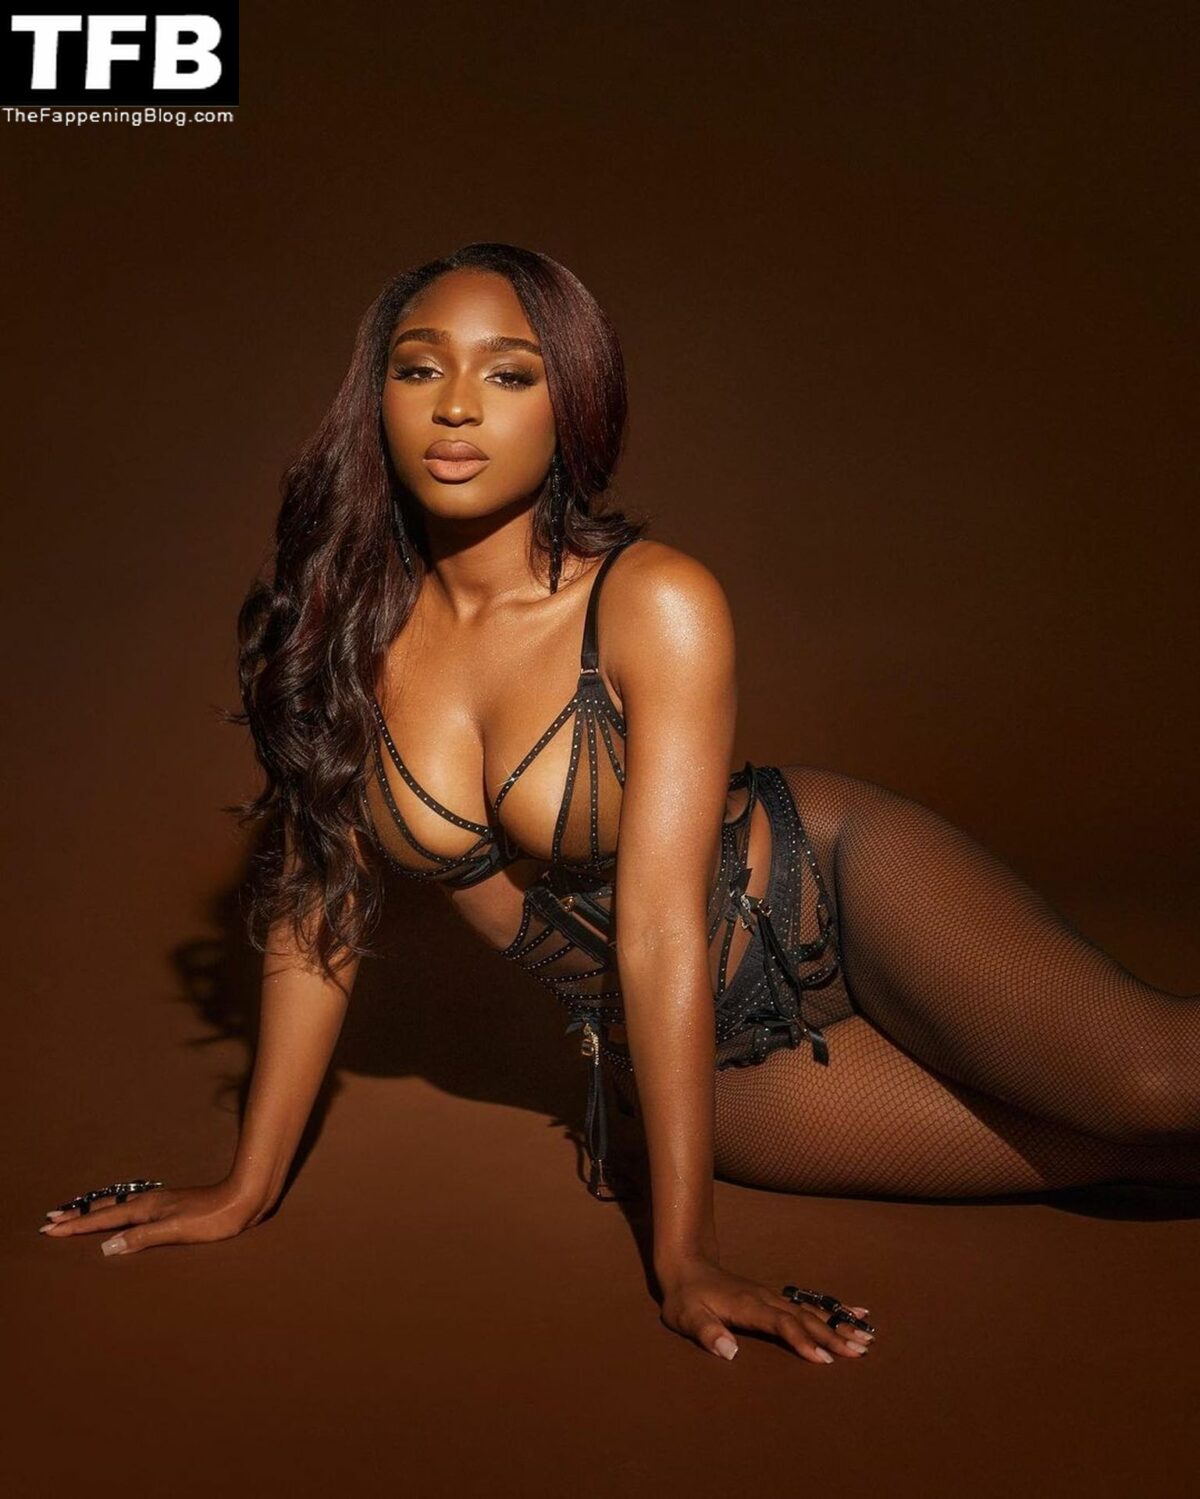 Normani Kordei Sexy Lingerie 4 1 thefappeningblog.com  1200x1499 - Normani Poses in Lingerie (7 Photos)